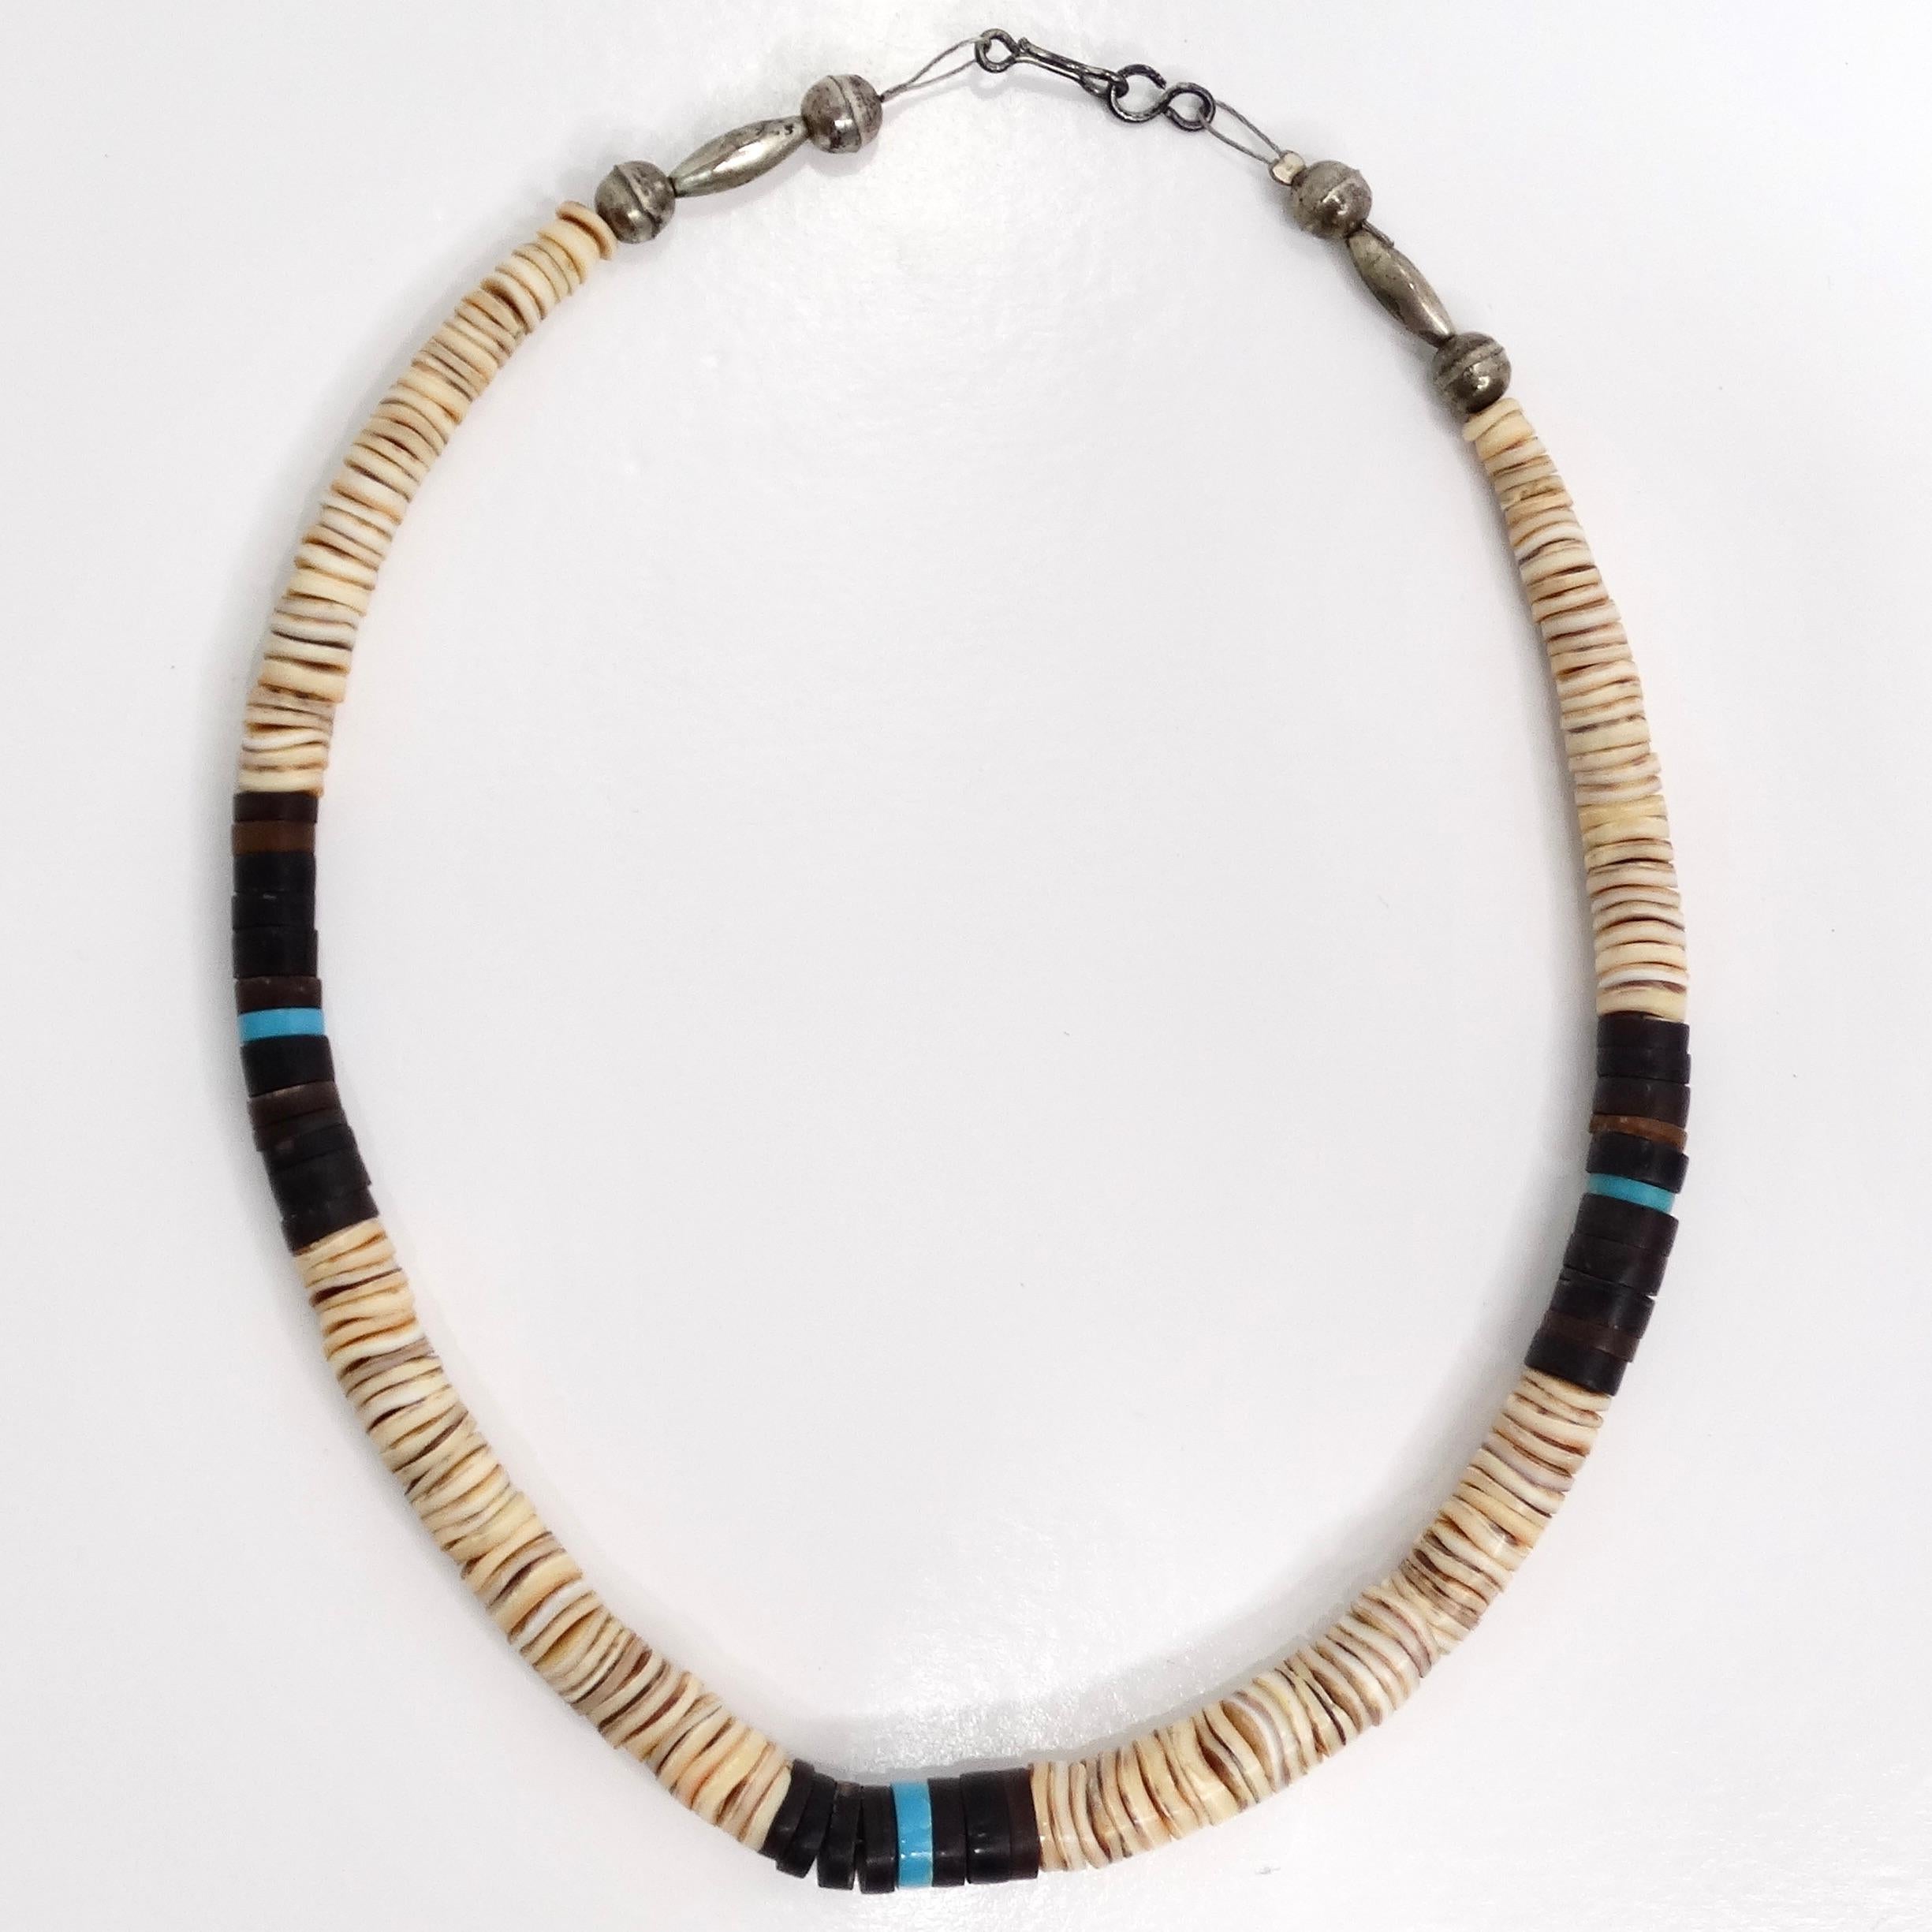 Elevate your vintage jewelry collection with the stunning 1950s Turquoise Shell Beaded Necklace. This exquisite choker features a harmonious blend of vibrant blue turquoise, black, and ivory shell beads, creating a unique and eye-catching design.